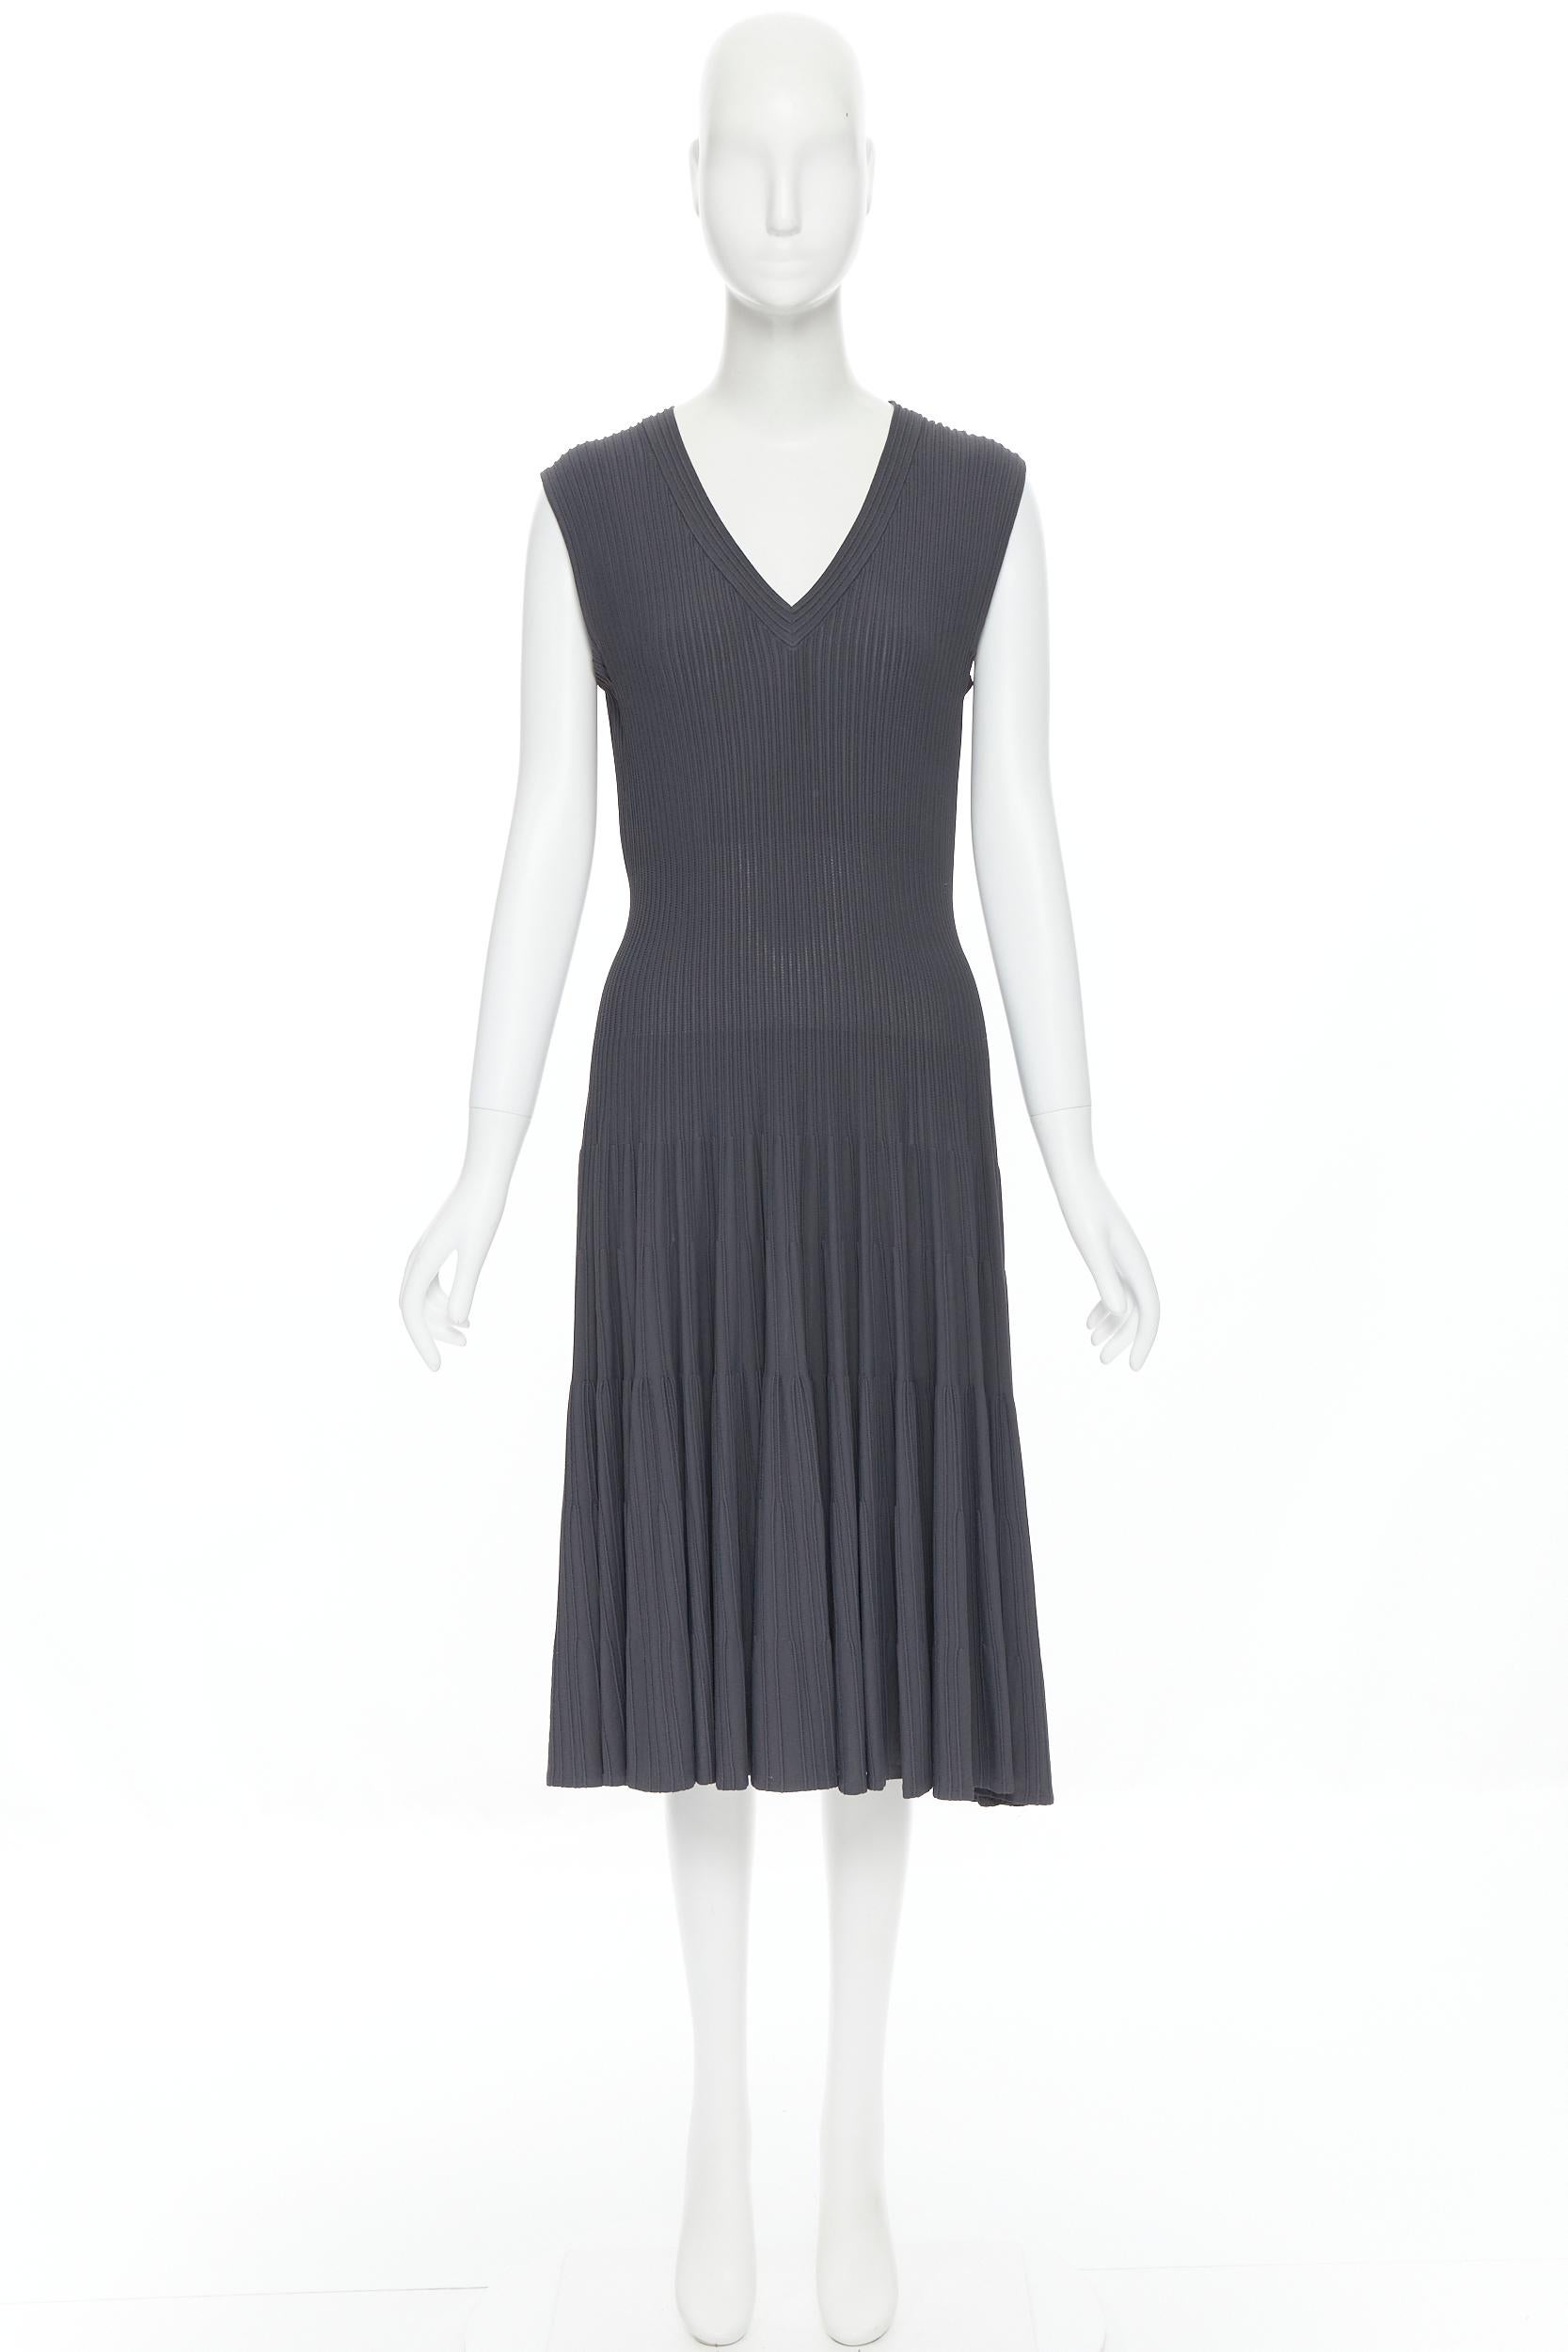 Black ALAIA dust grey ribbed V-neck sleeveless fit flared cocktail dress M